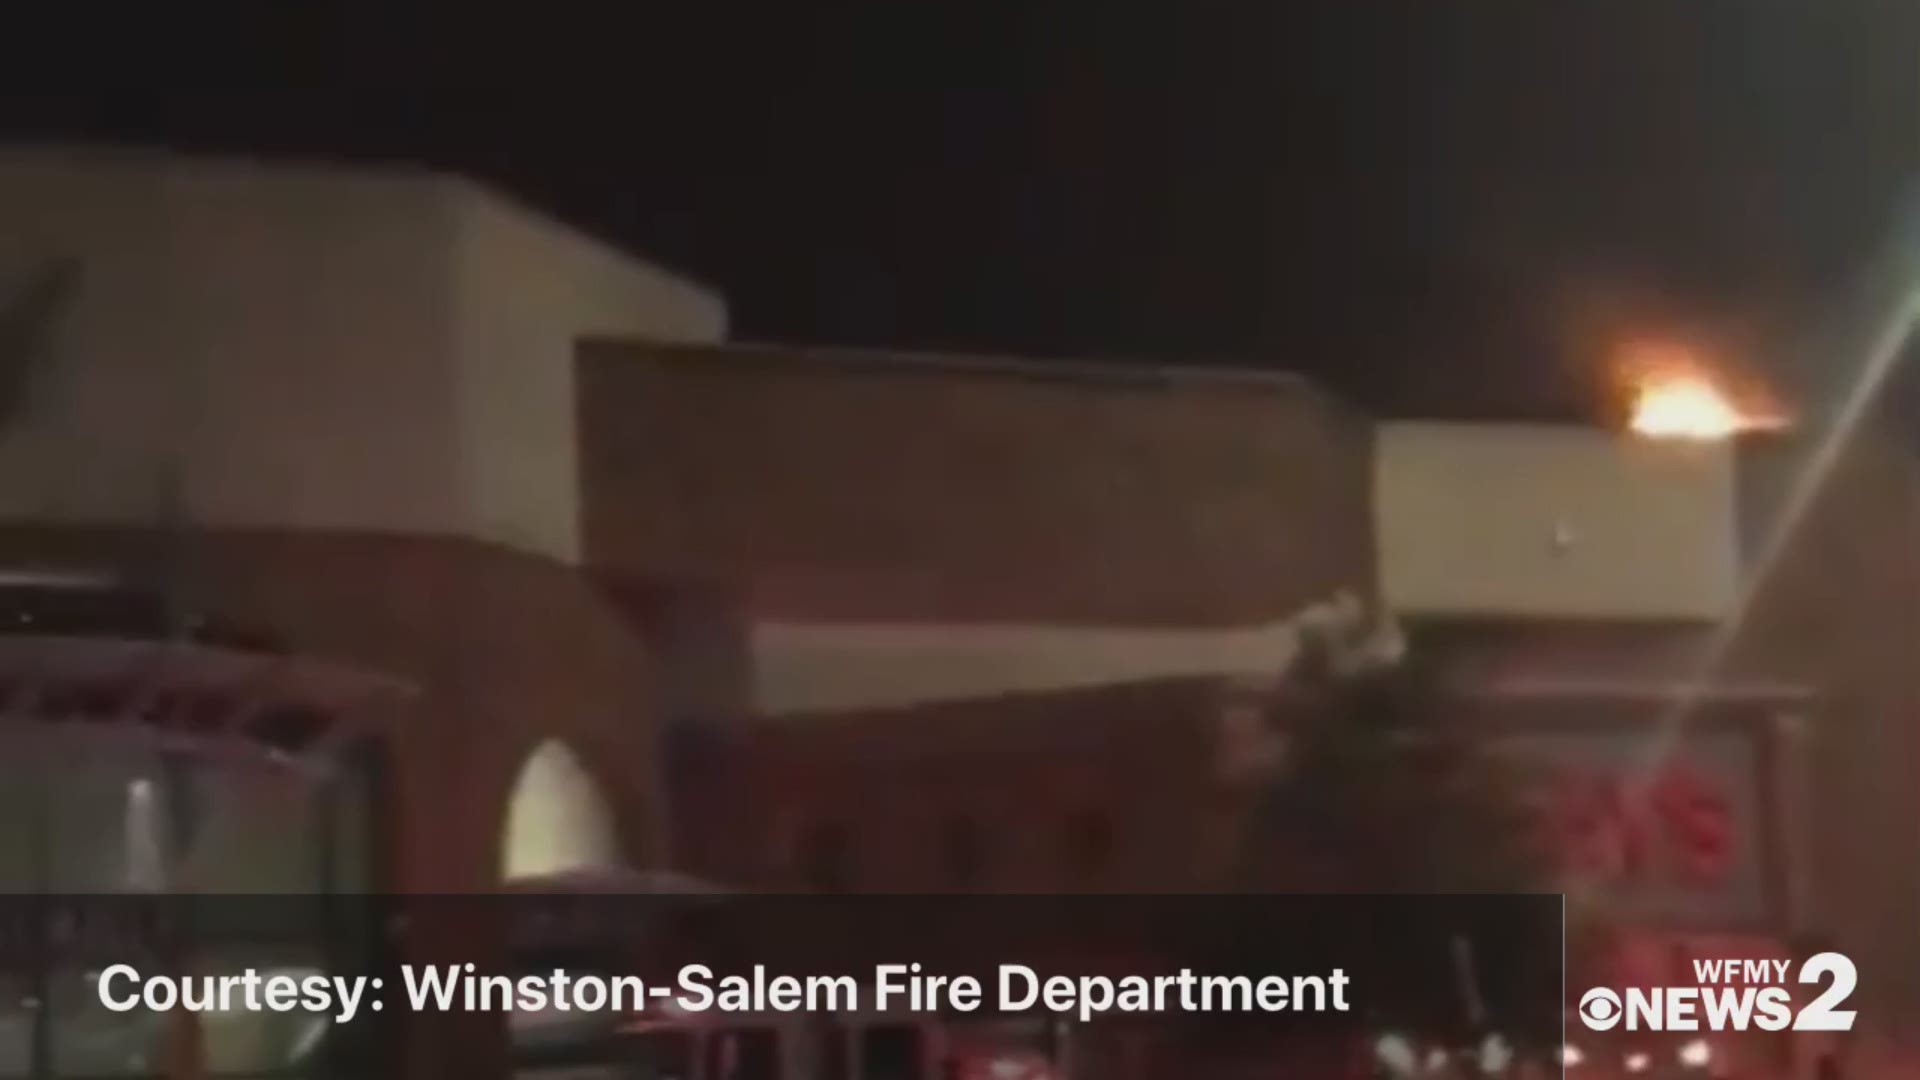 Hanes Mall officials say the Winston-Salem Fire Department responded to the two-alarm commercial fire quickly.